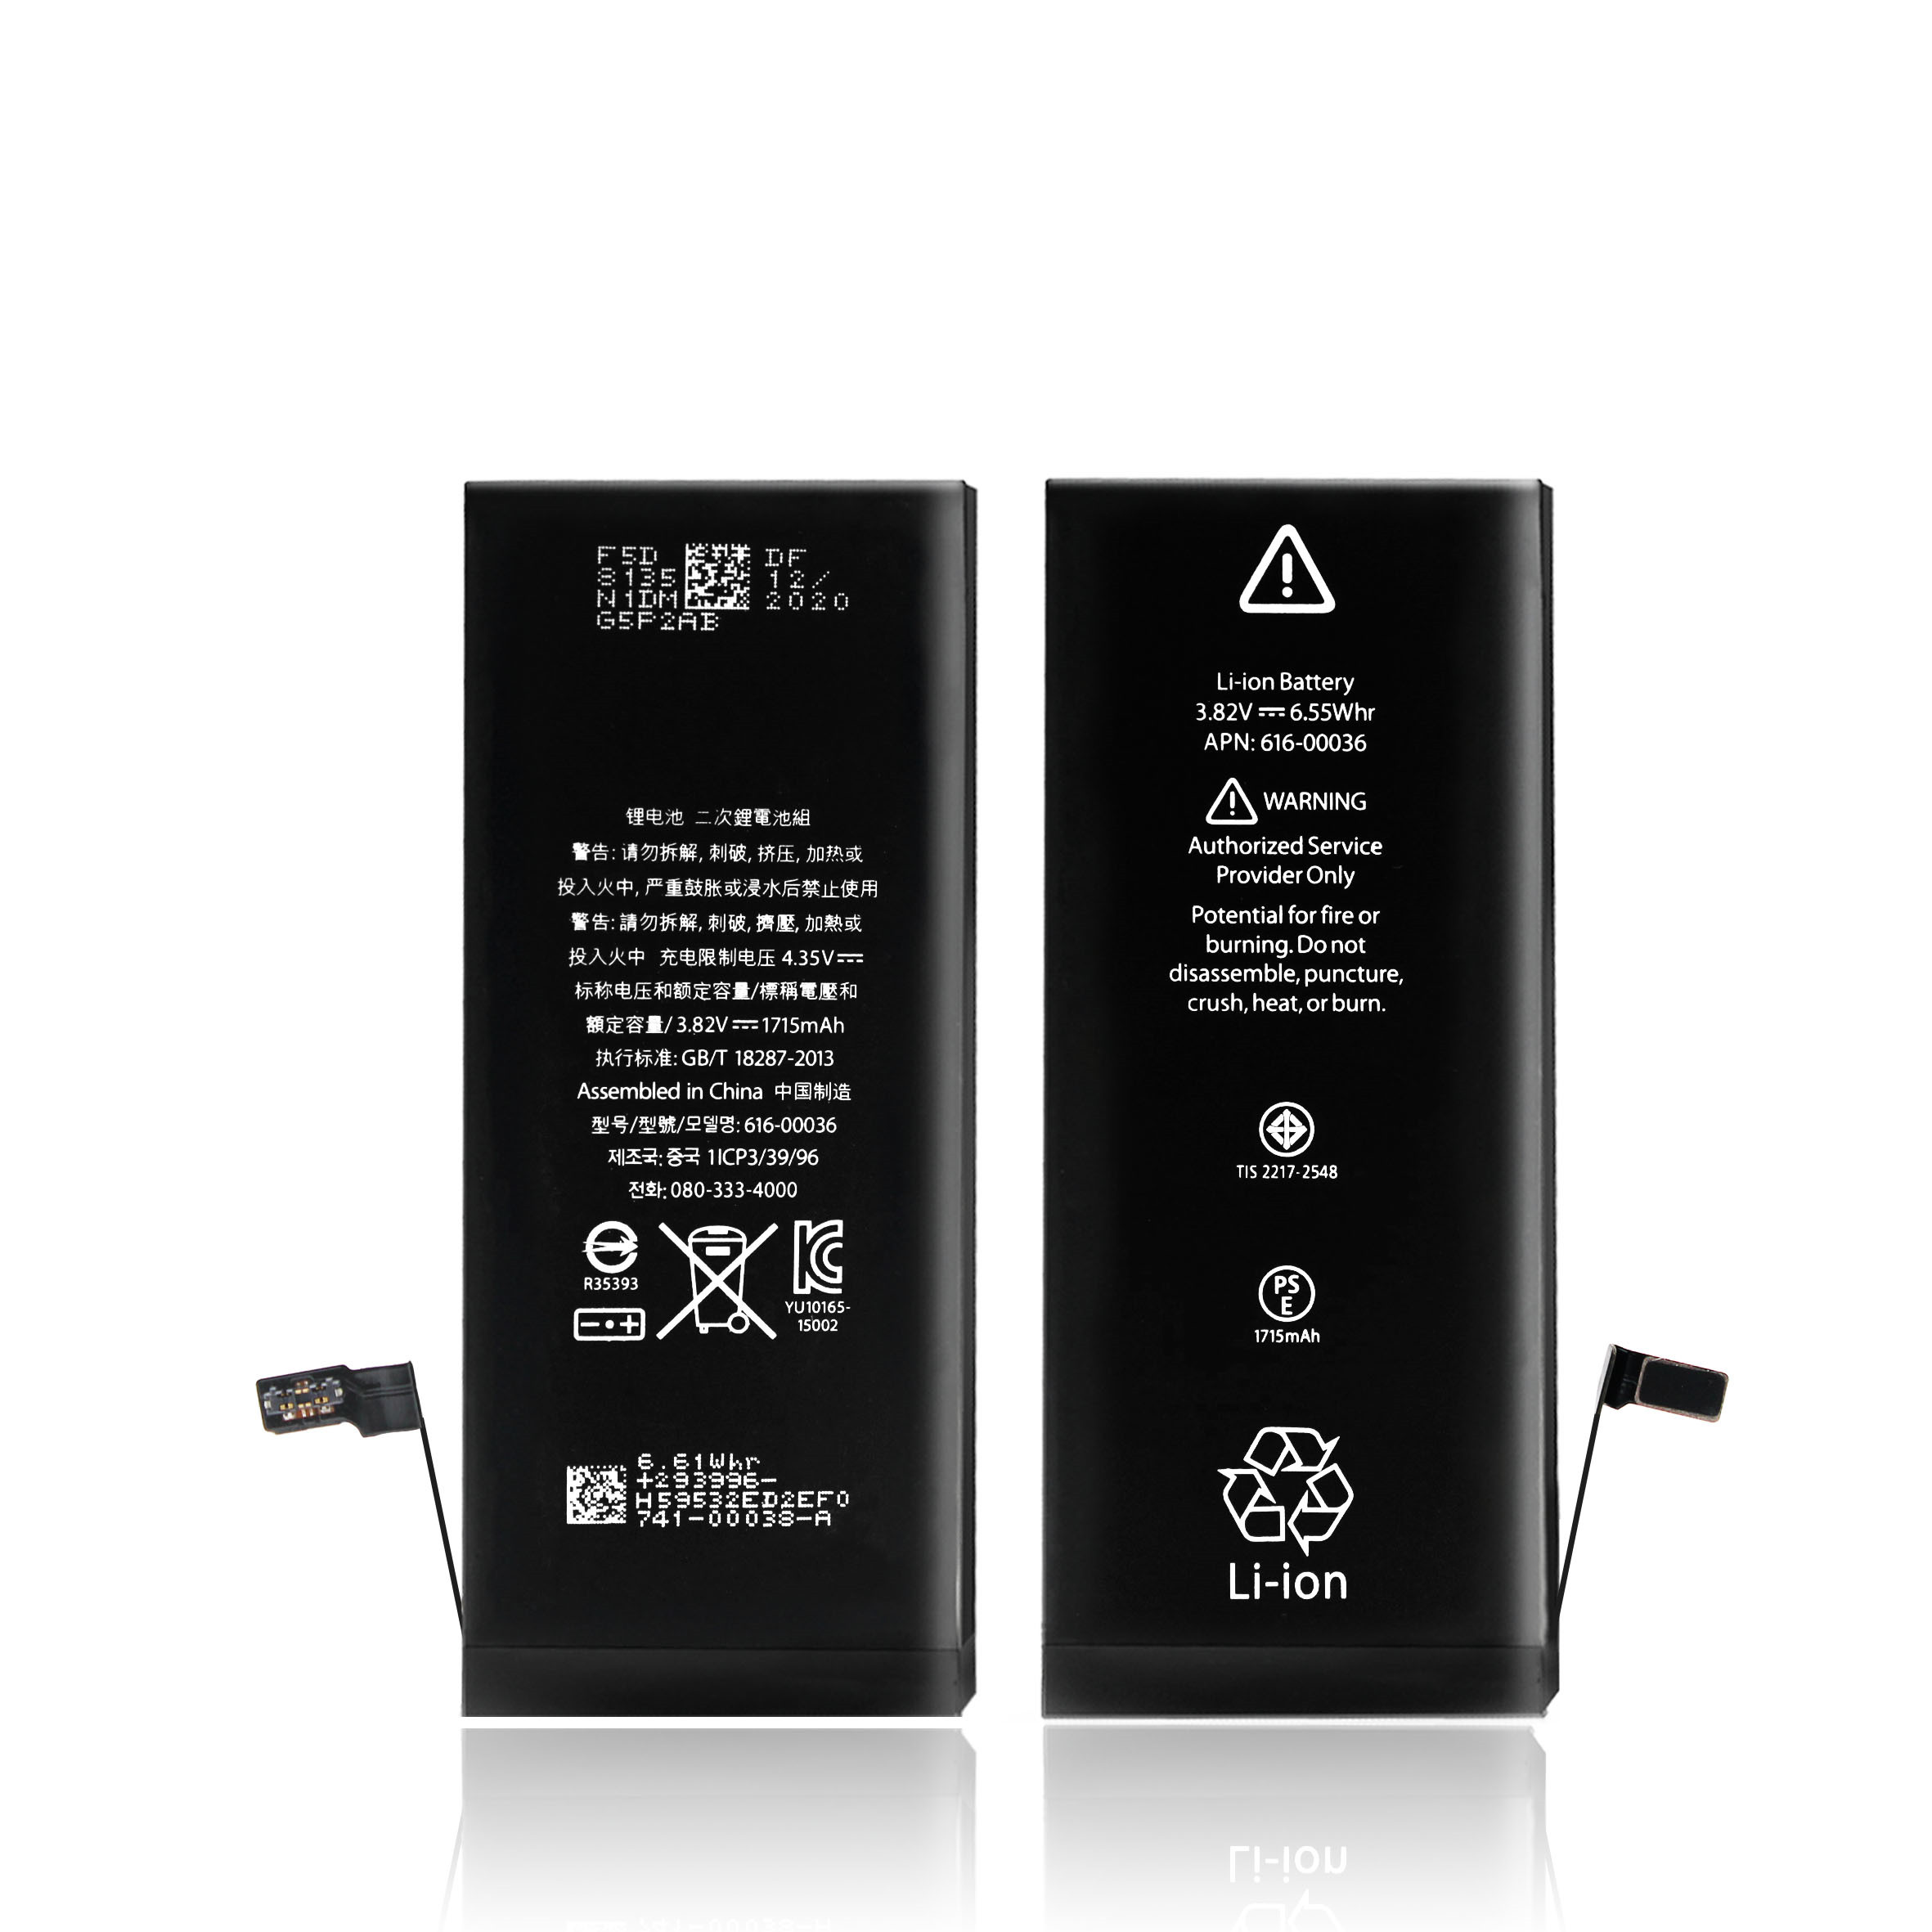 Iphone 6S battery